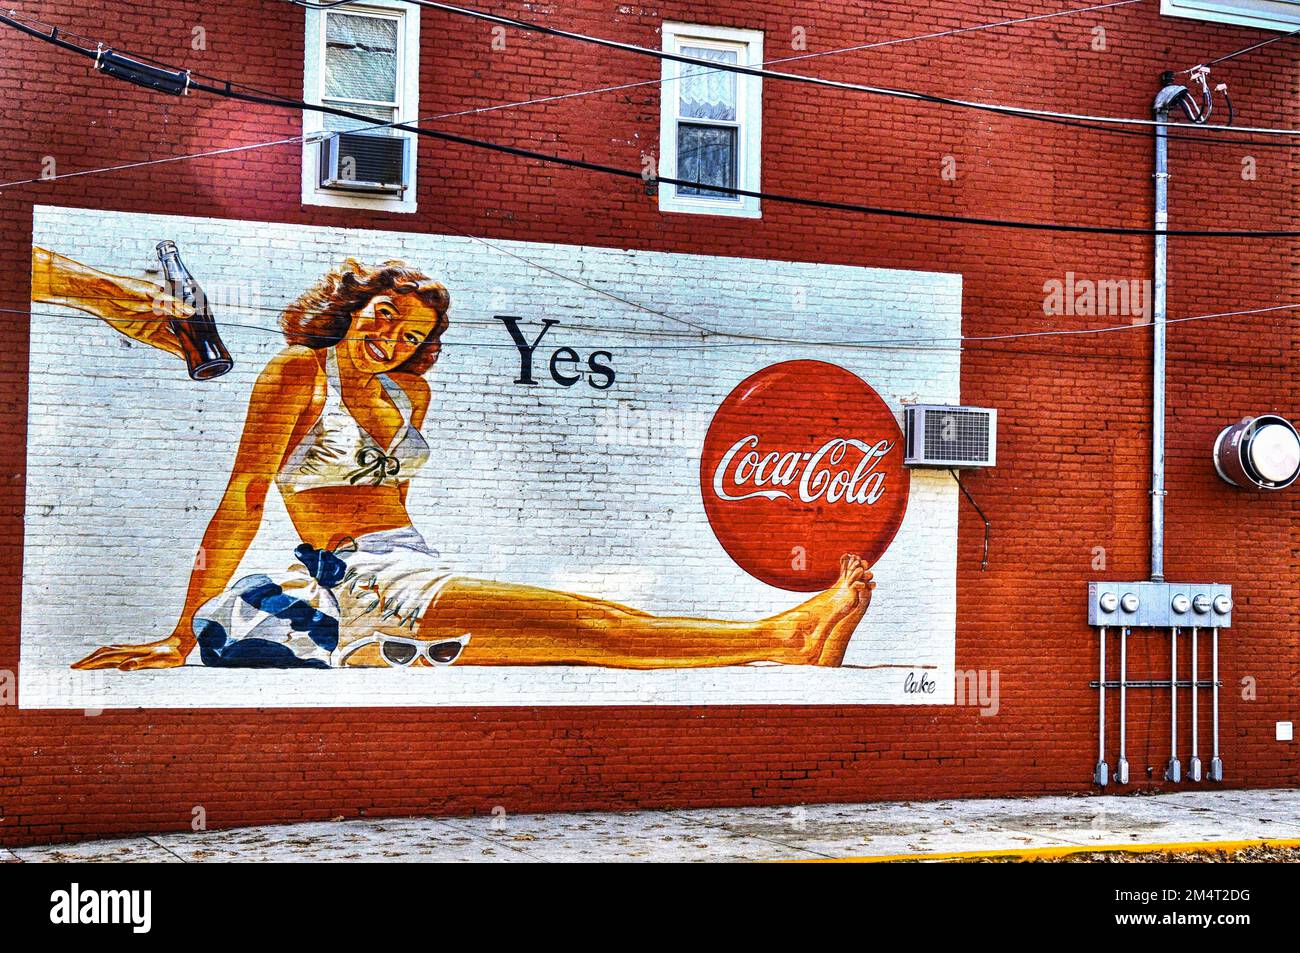 Old advertisement for Coca-Cola on the wall, Bristol, Pennsylvania, USA Stock Photo